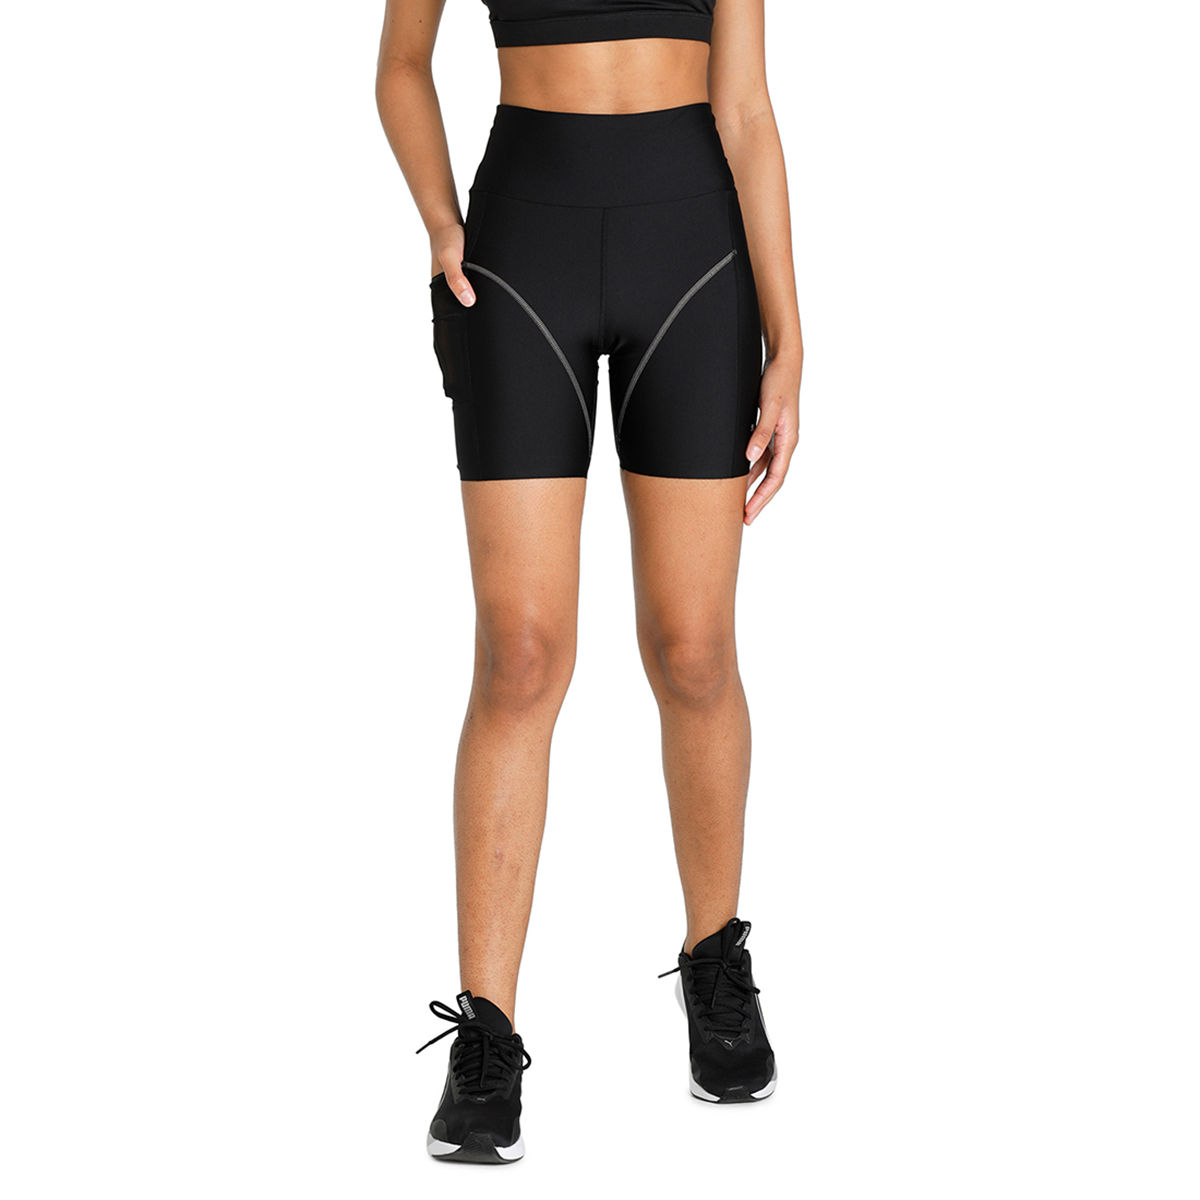 Women Shorts High Waist Seamless Push Up Tight Sports Leggings Yoga Shorts  Pants Running Fitness Gym Clothes Leggings Sportswear Color: Other, Size:  European size XL | Uquid shopping cart: Online shopping with